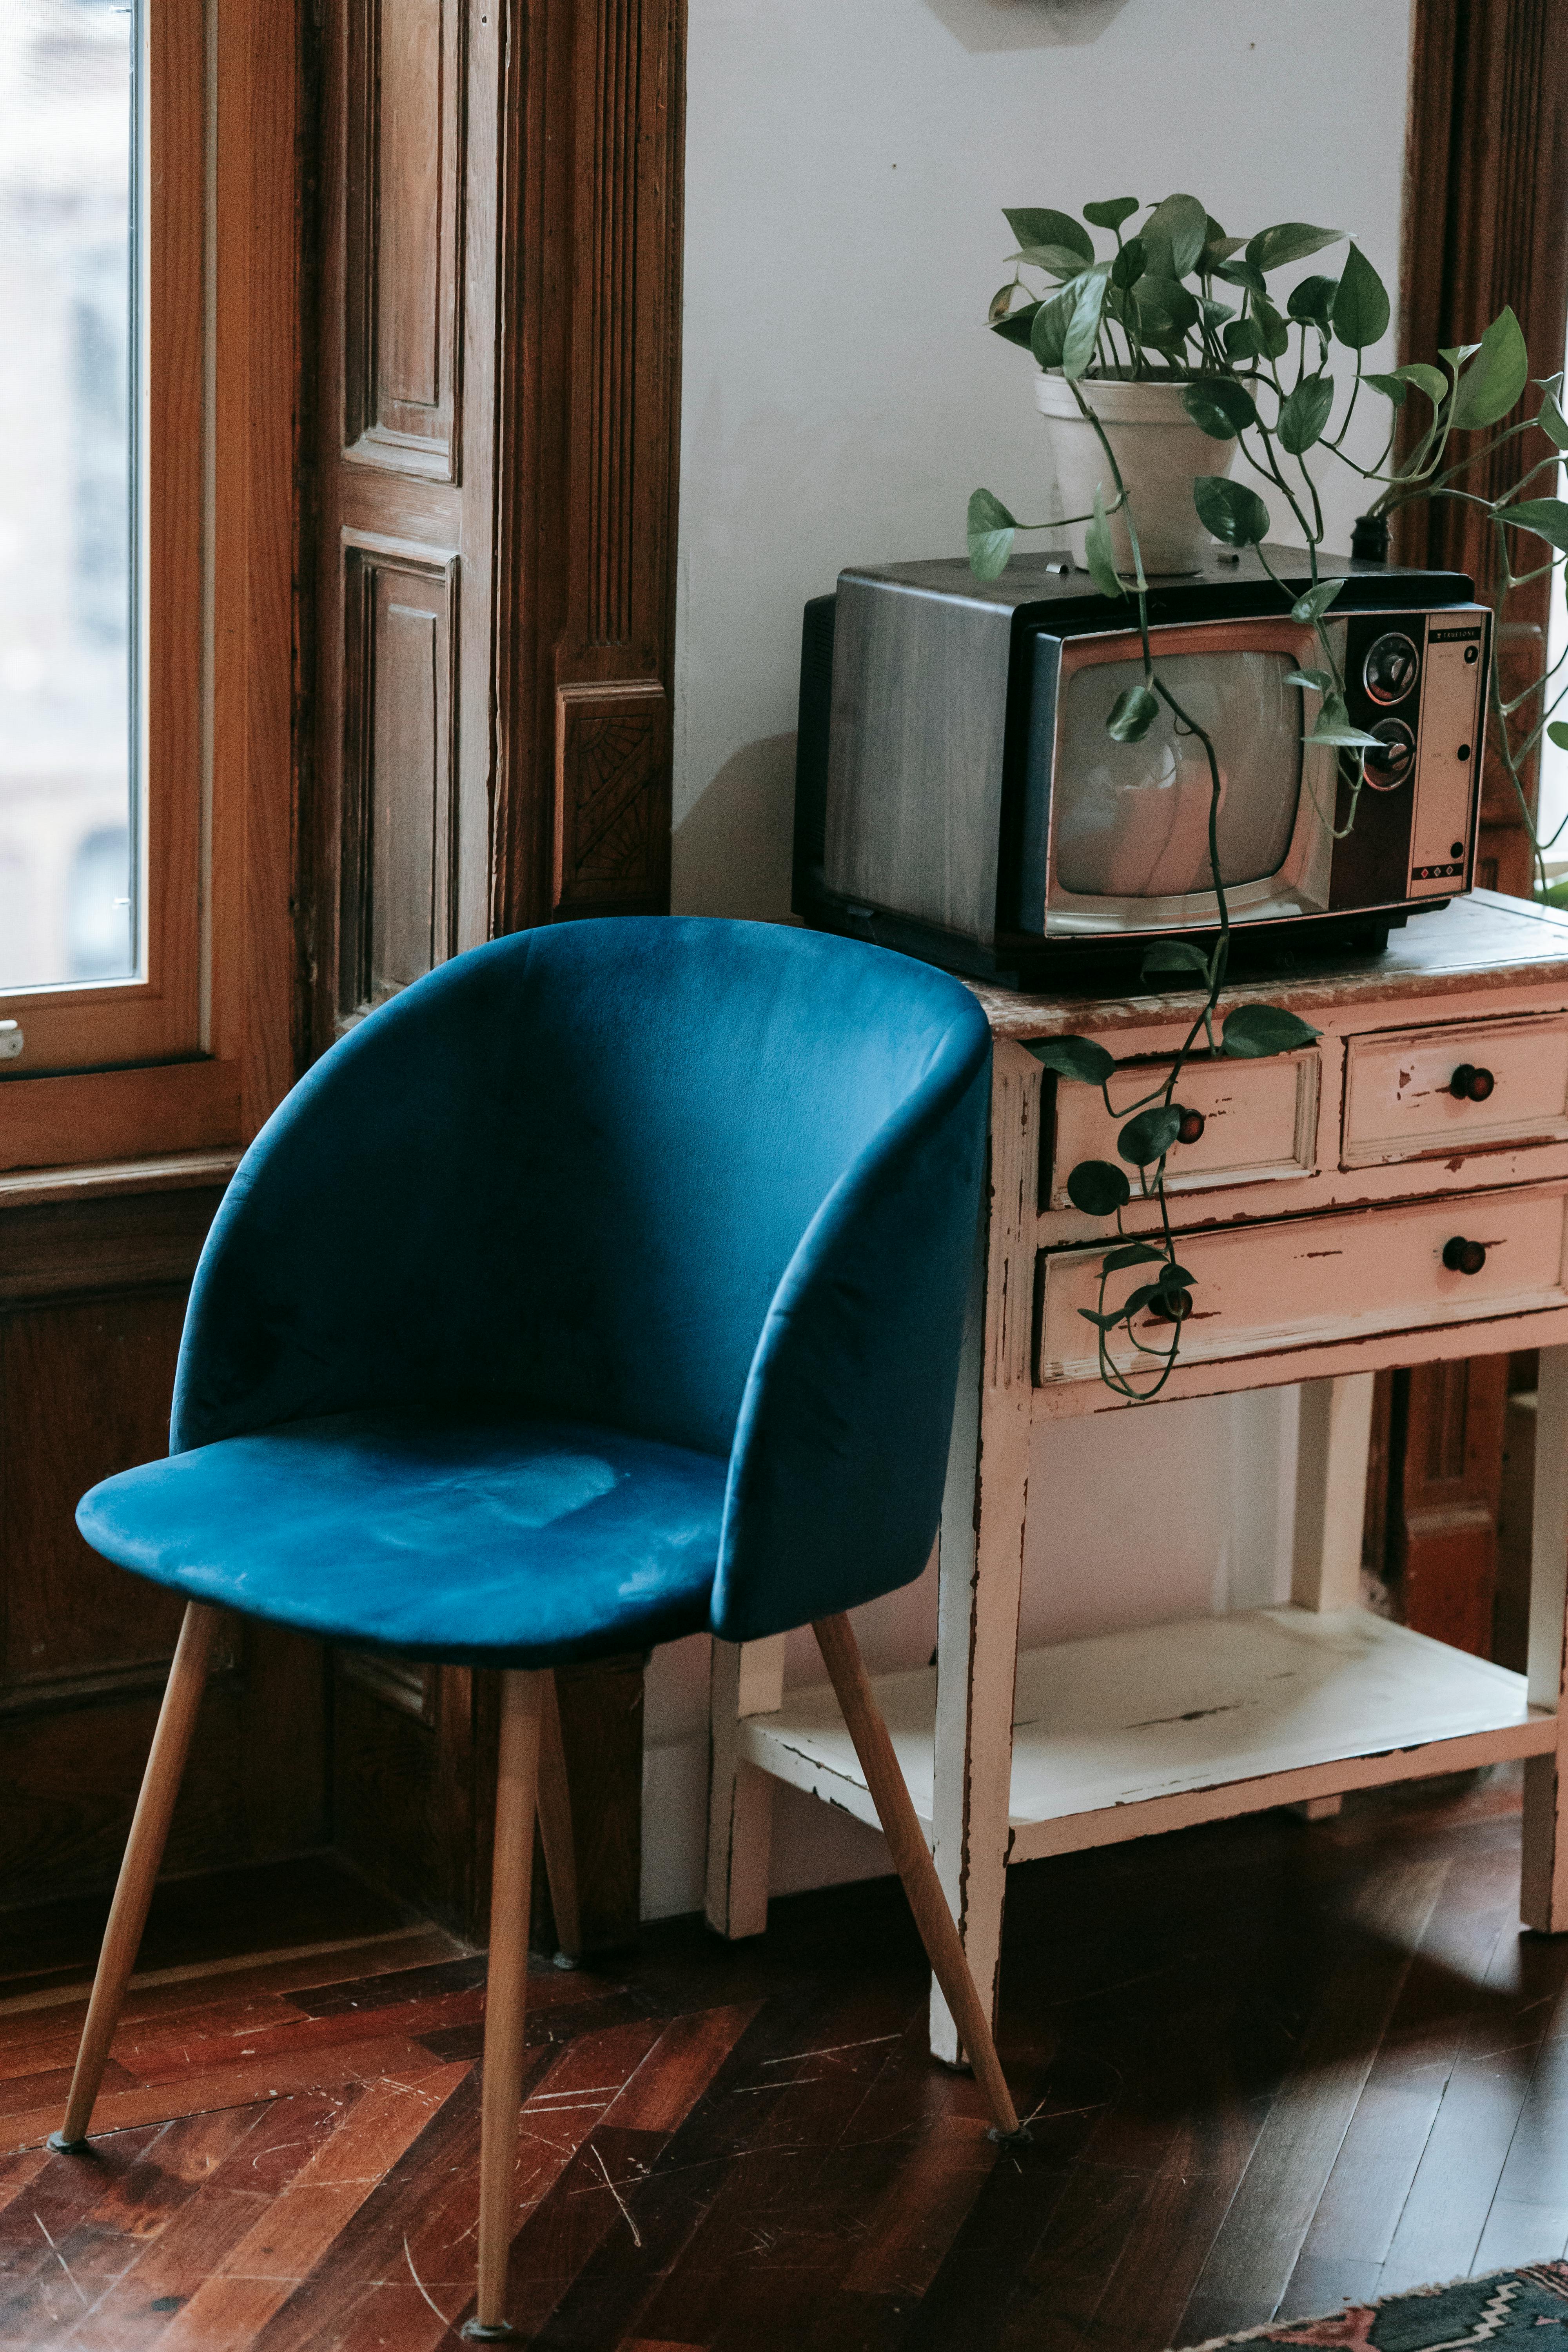 cozy chair placed near shabby cabinet with retro tv